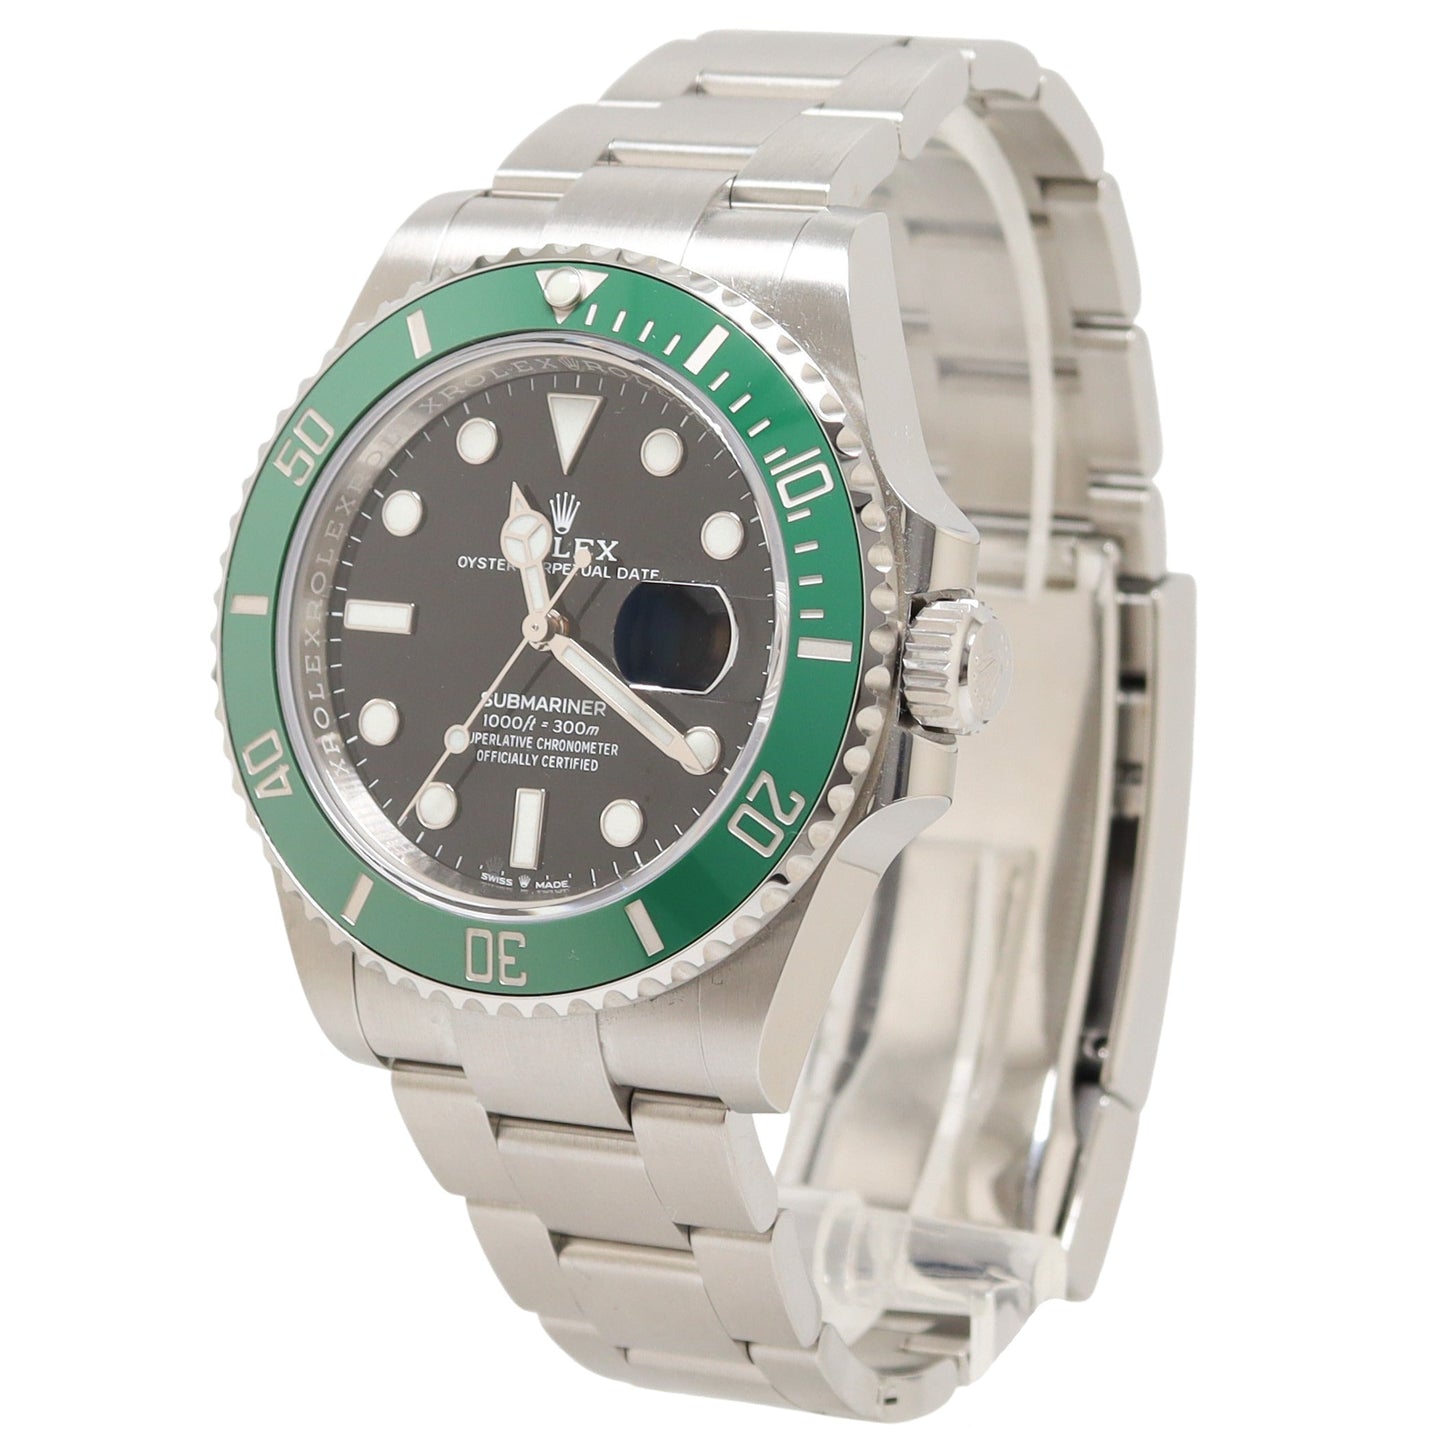 Rolex Submariner "Starbucks" 41mm Stainless Steel Black Dot Dial Watch Reference# 126610LV - Happy Jewelers Fine Jewelry Lifetime Warranty